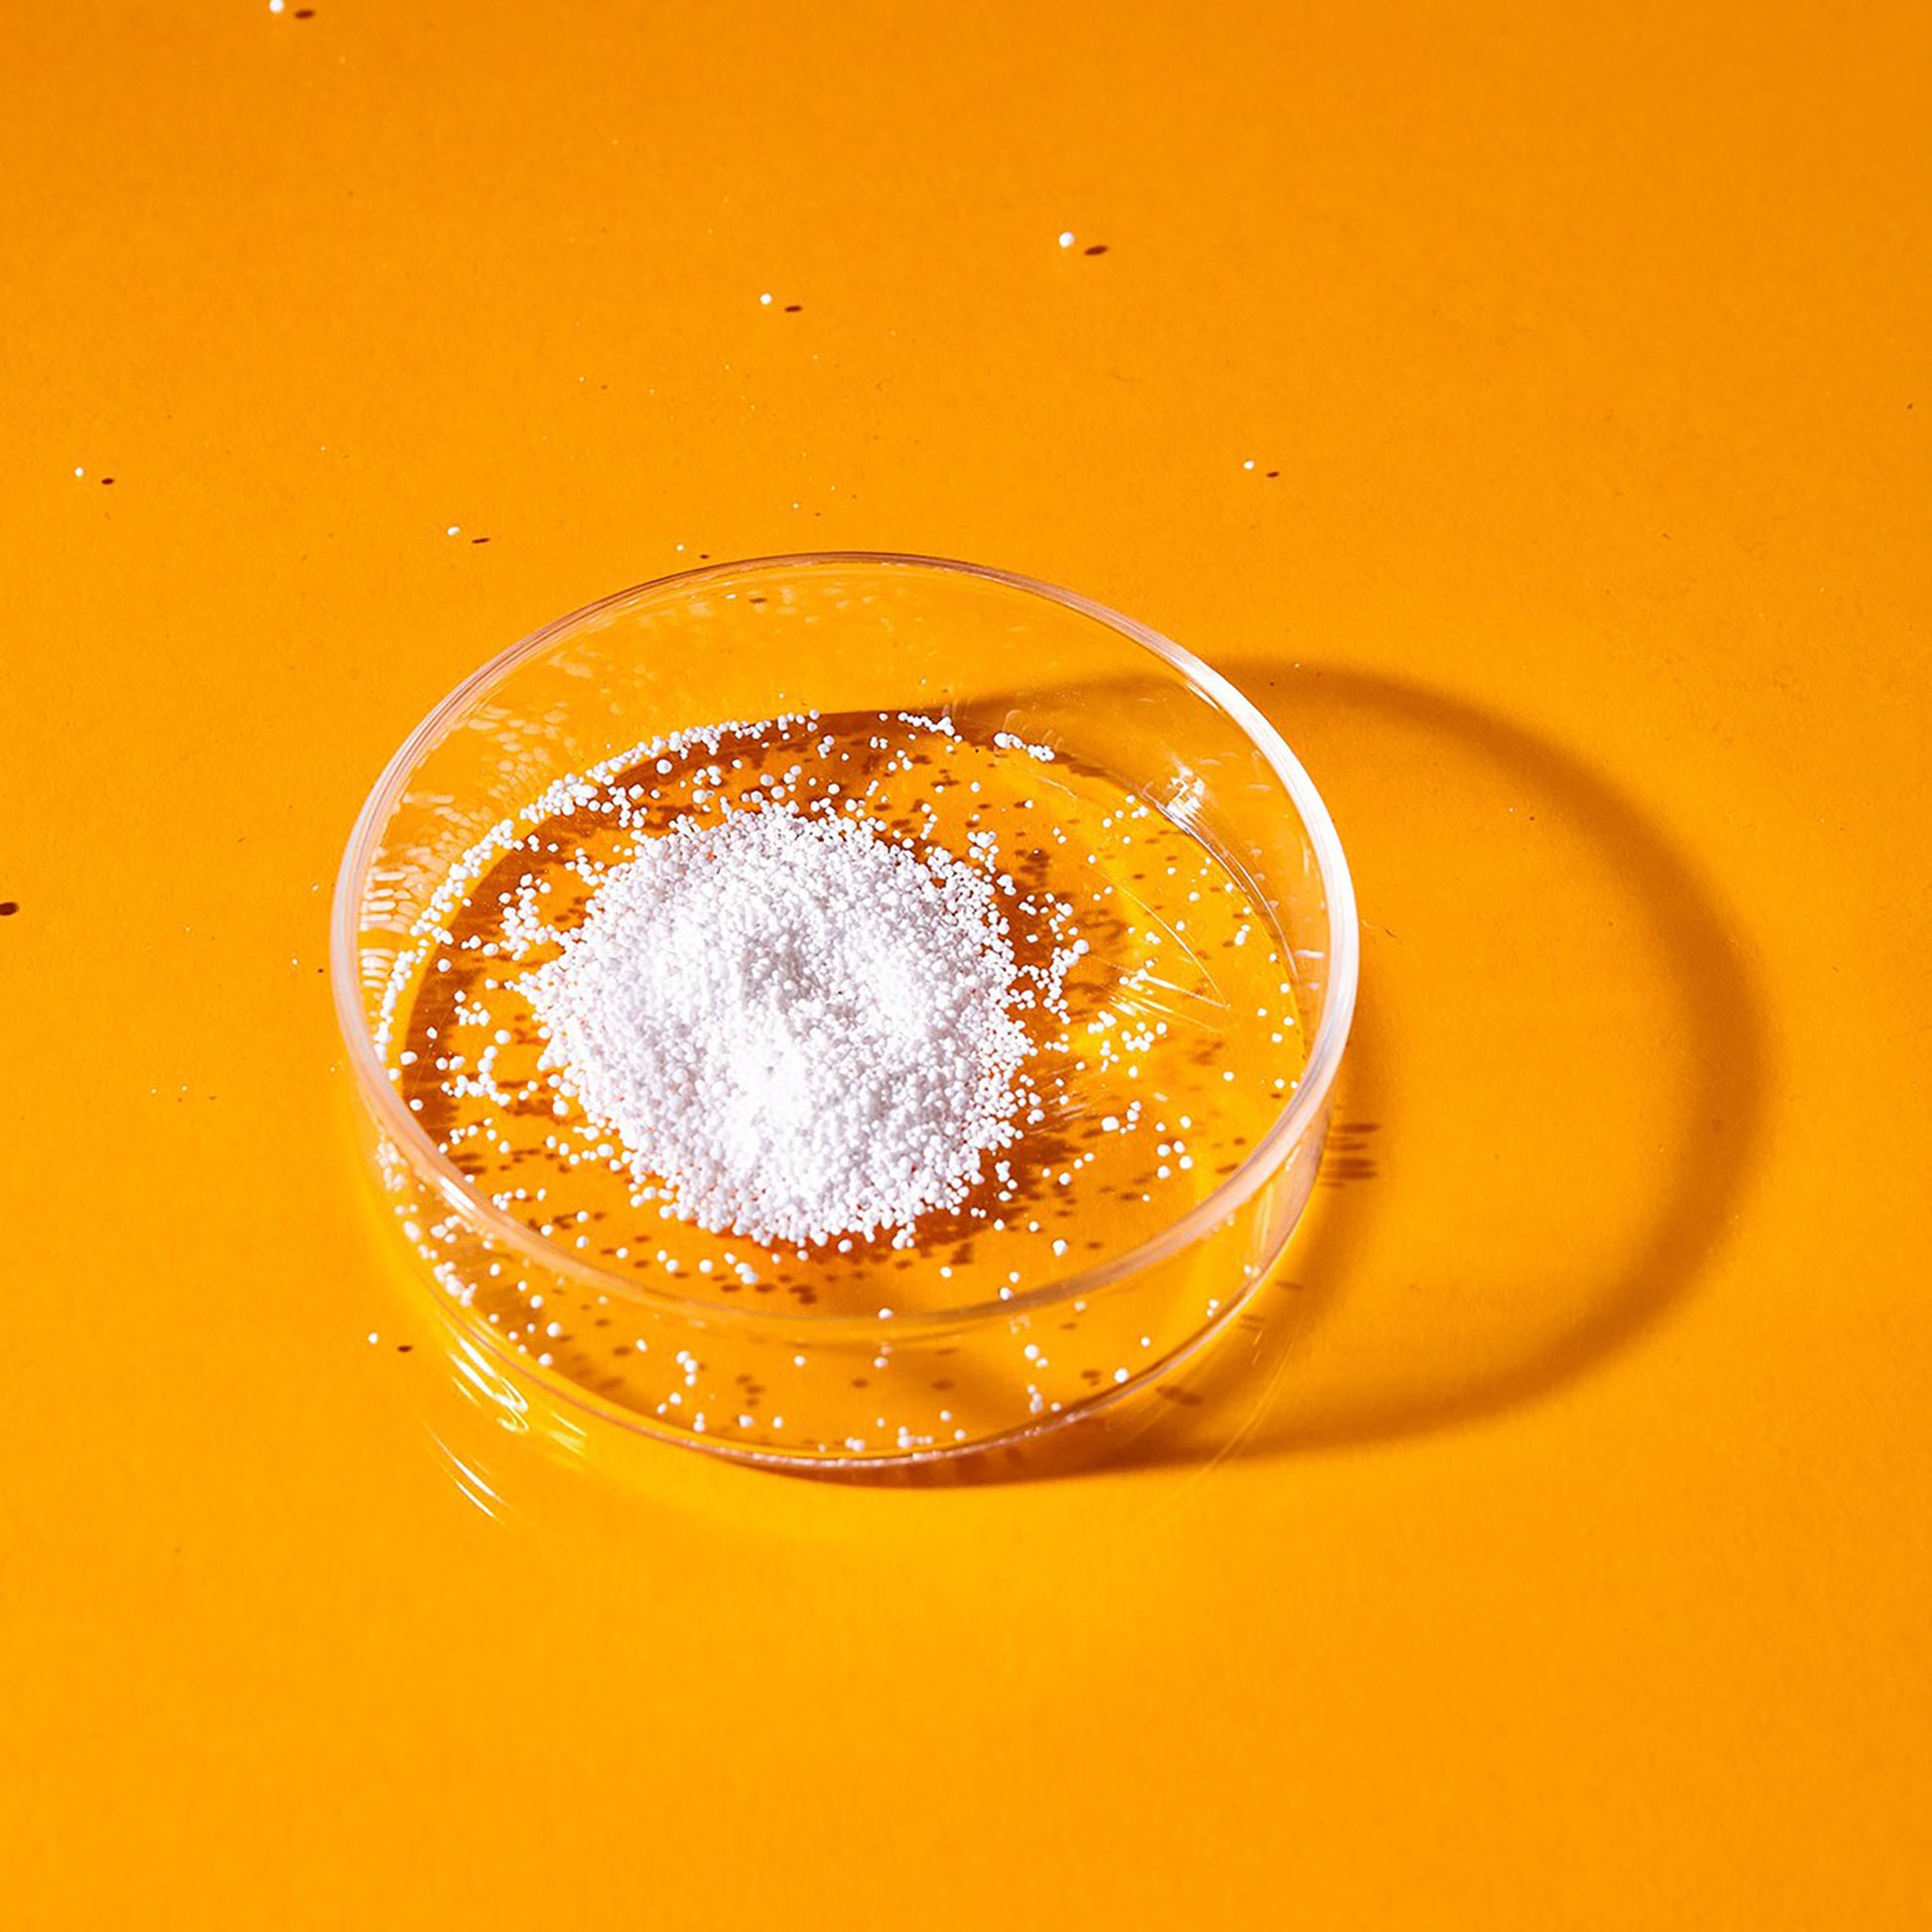 A single dose of white Supersalt oxygen booster powder is displayed in a petri dish on an orange background